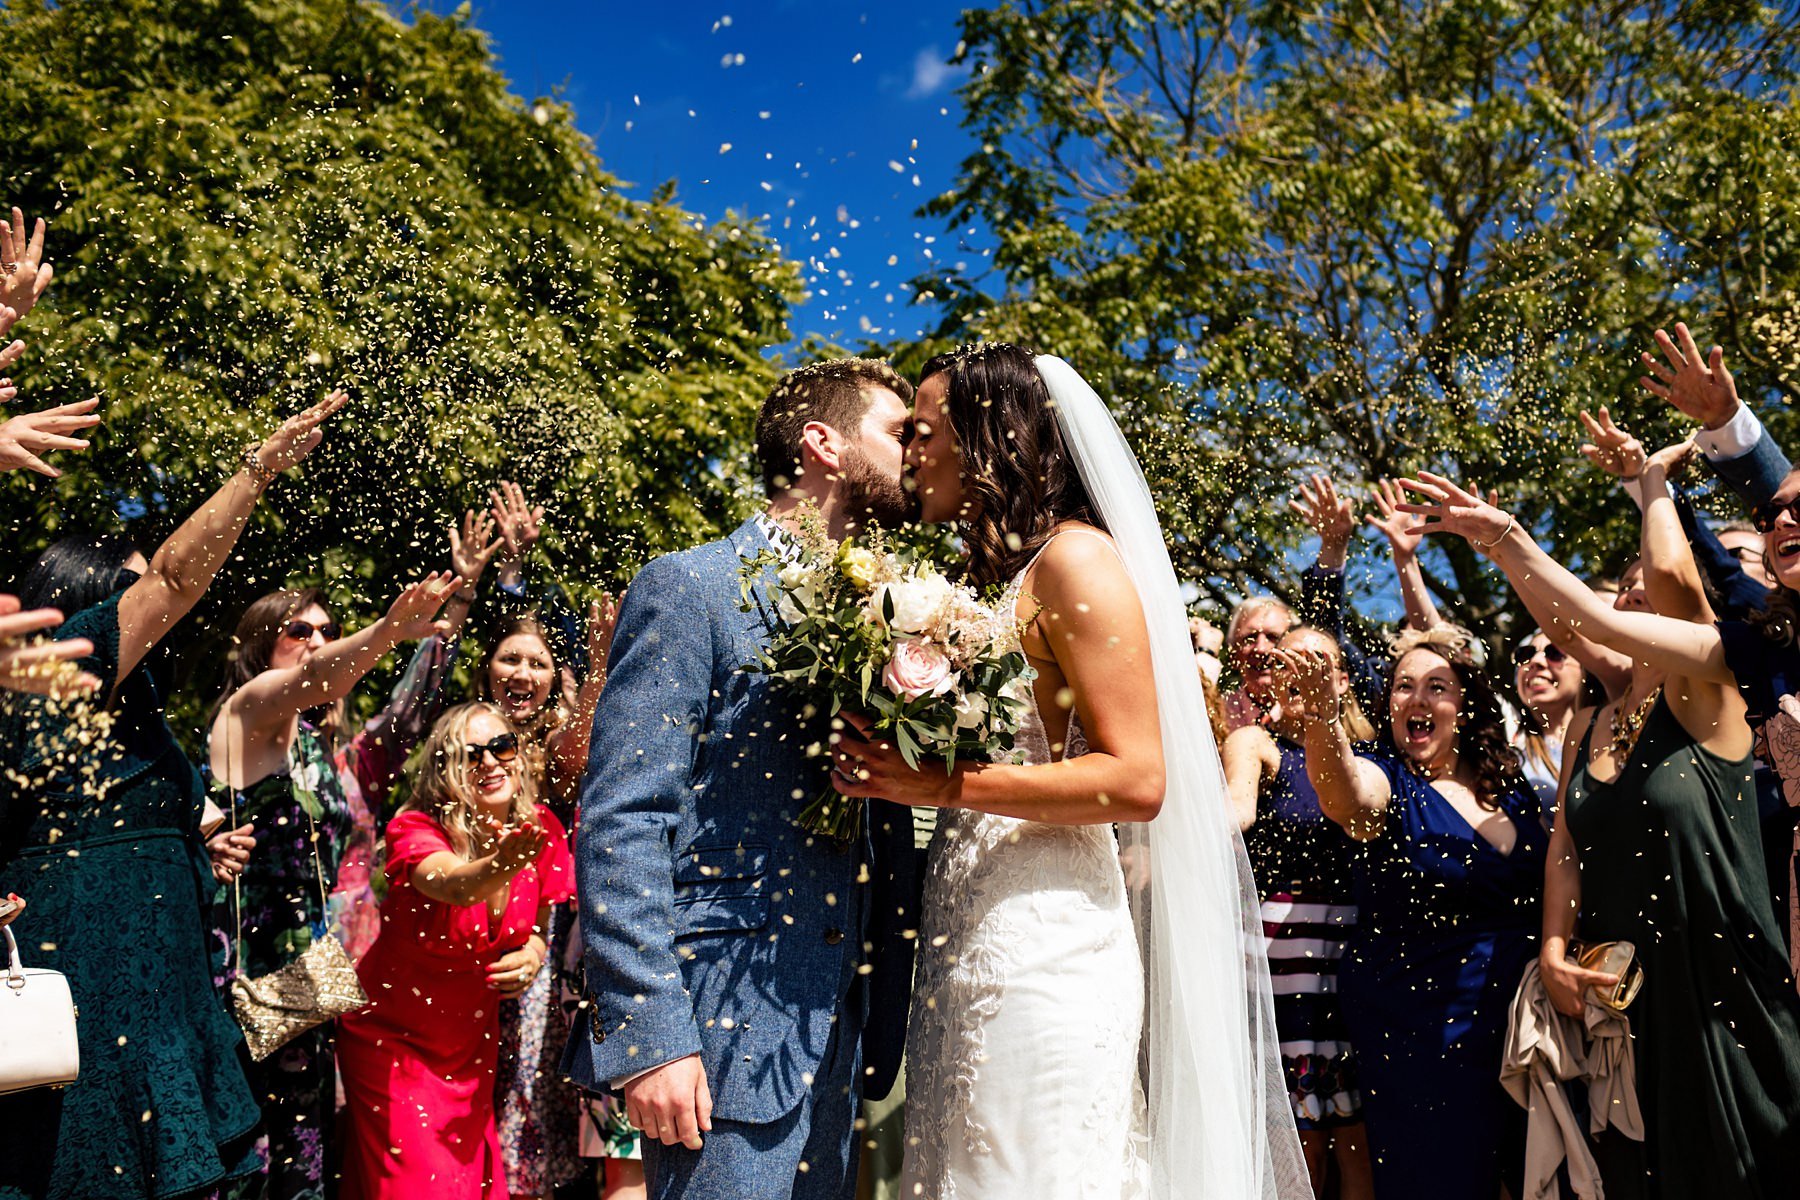 A bride and groom kiss as they are showered with confetti by their surrounding guests at their wedding at Bury Court Barn